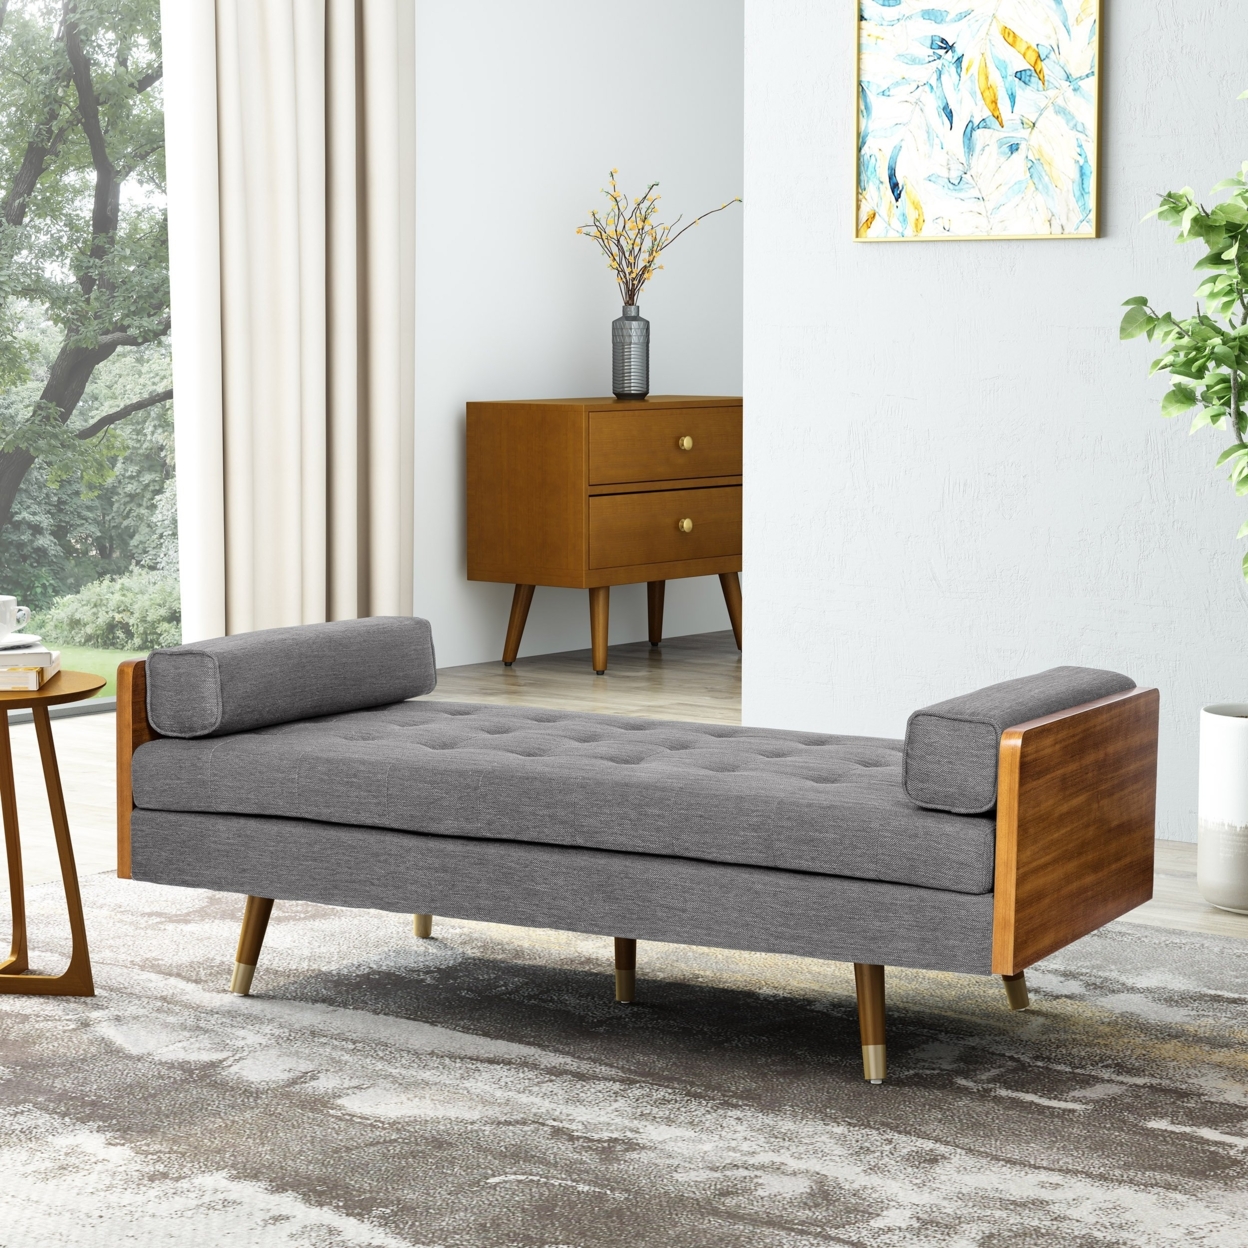 Tiltonsville Mid-Century Modern Tufted Double End Chaise Lounge With Bolster Pillows - Dark Walnut With Golden/navy Blue